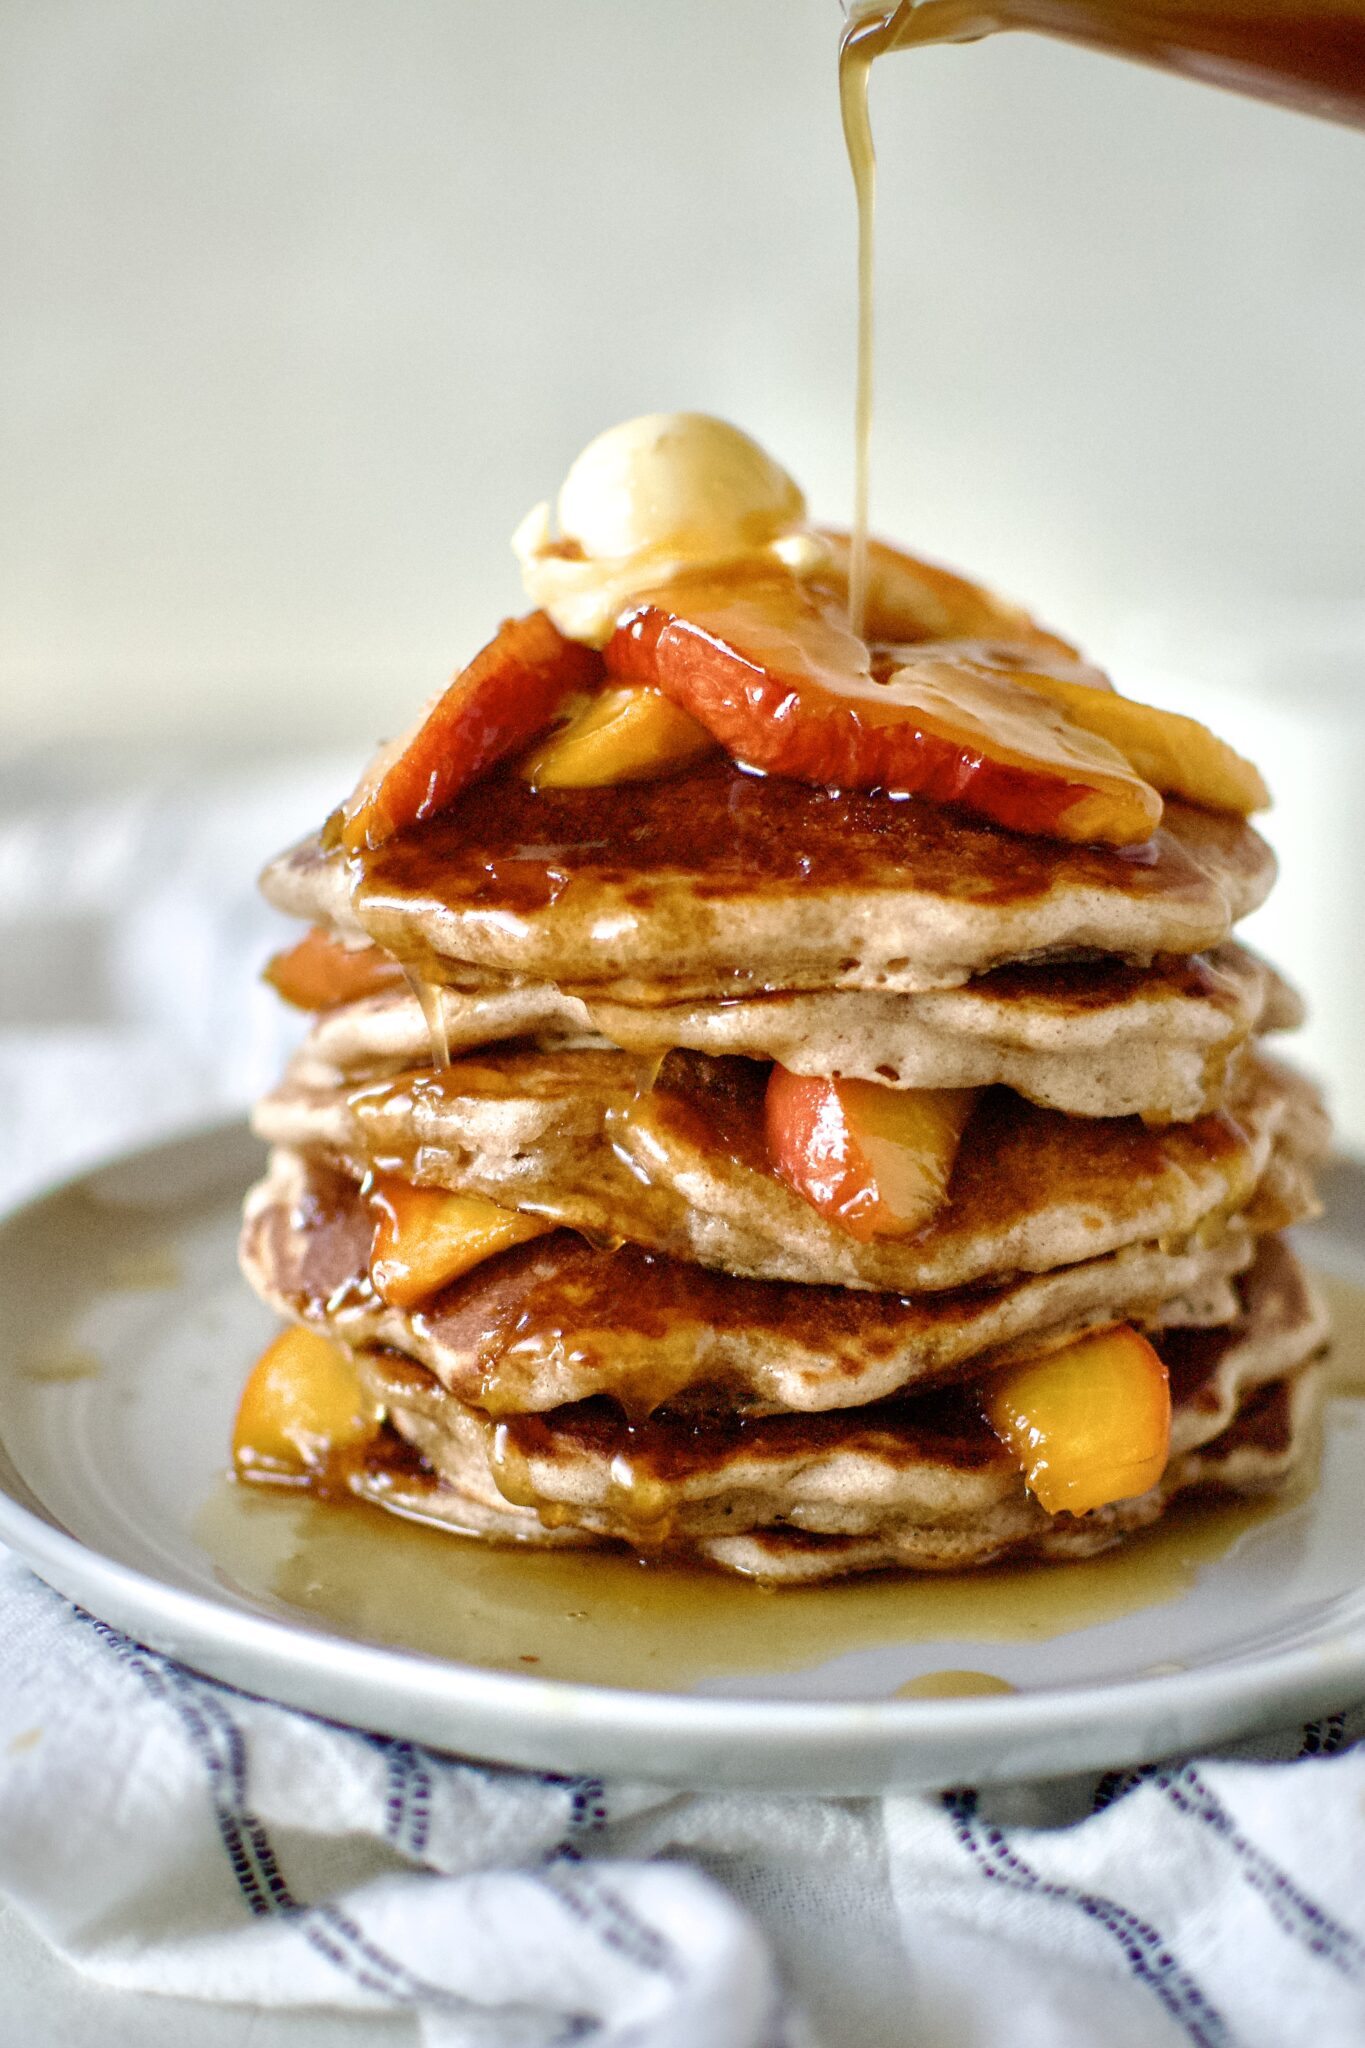 Peach Pancakes onPeach Pancakes on a plate ready to eat. Drizzling with syrup. a plate ready to eat.